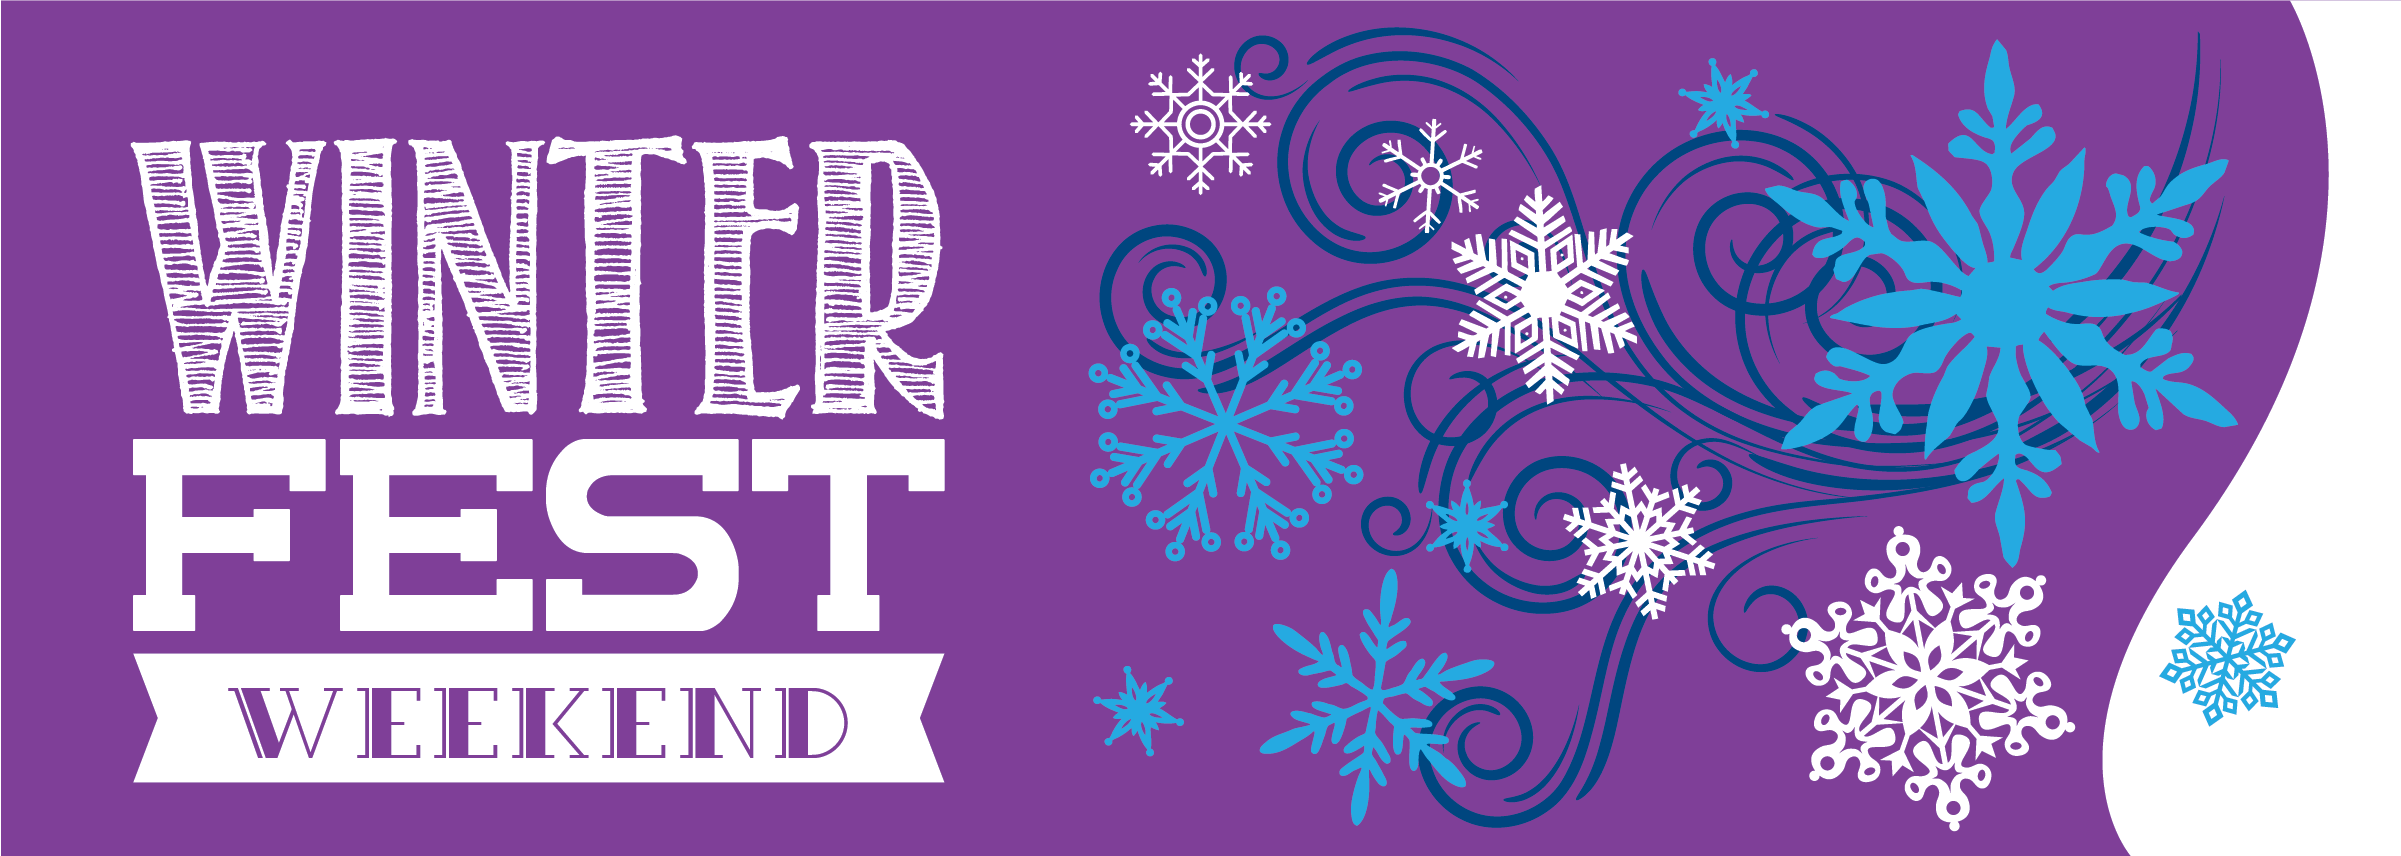 Horizontal banner with stylized text that reads "Winterfest Weekend"